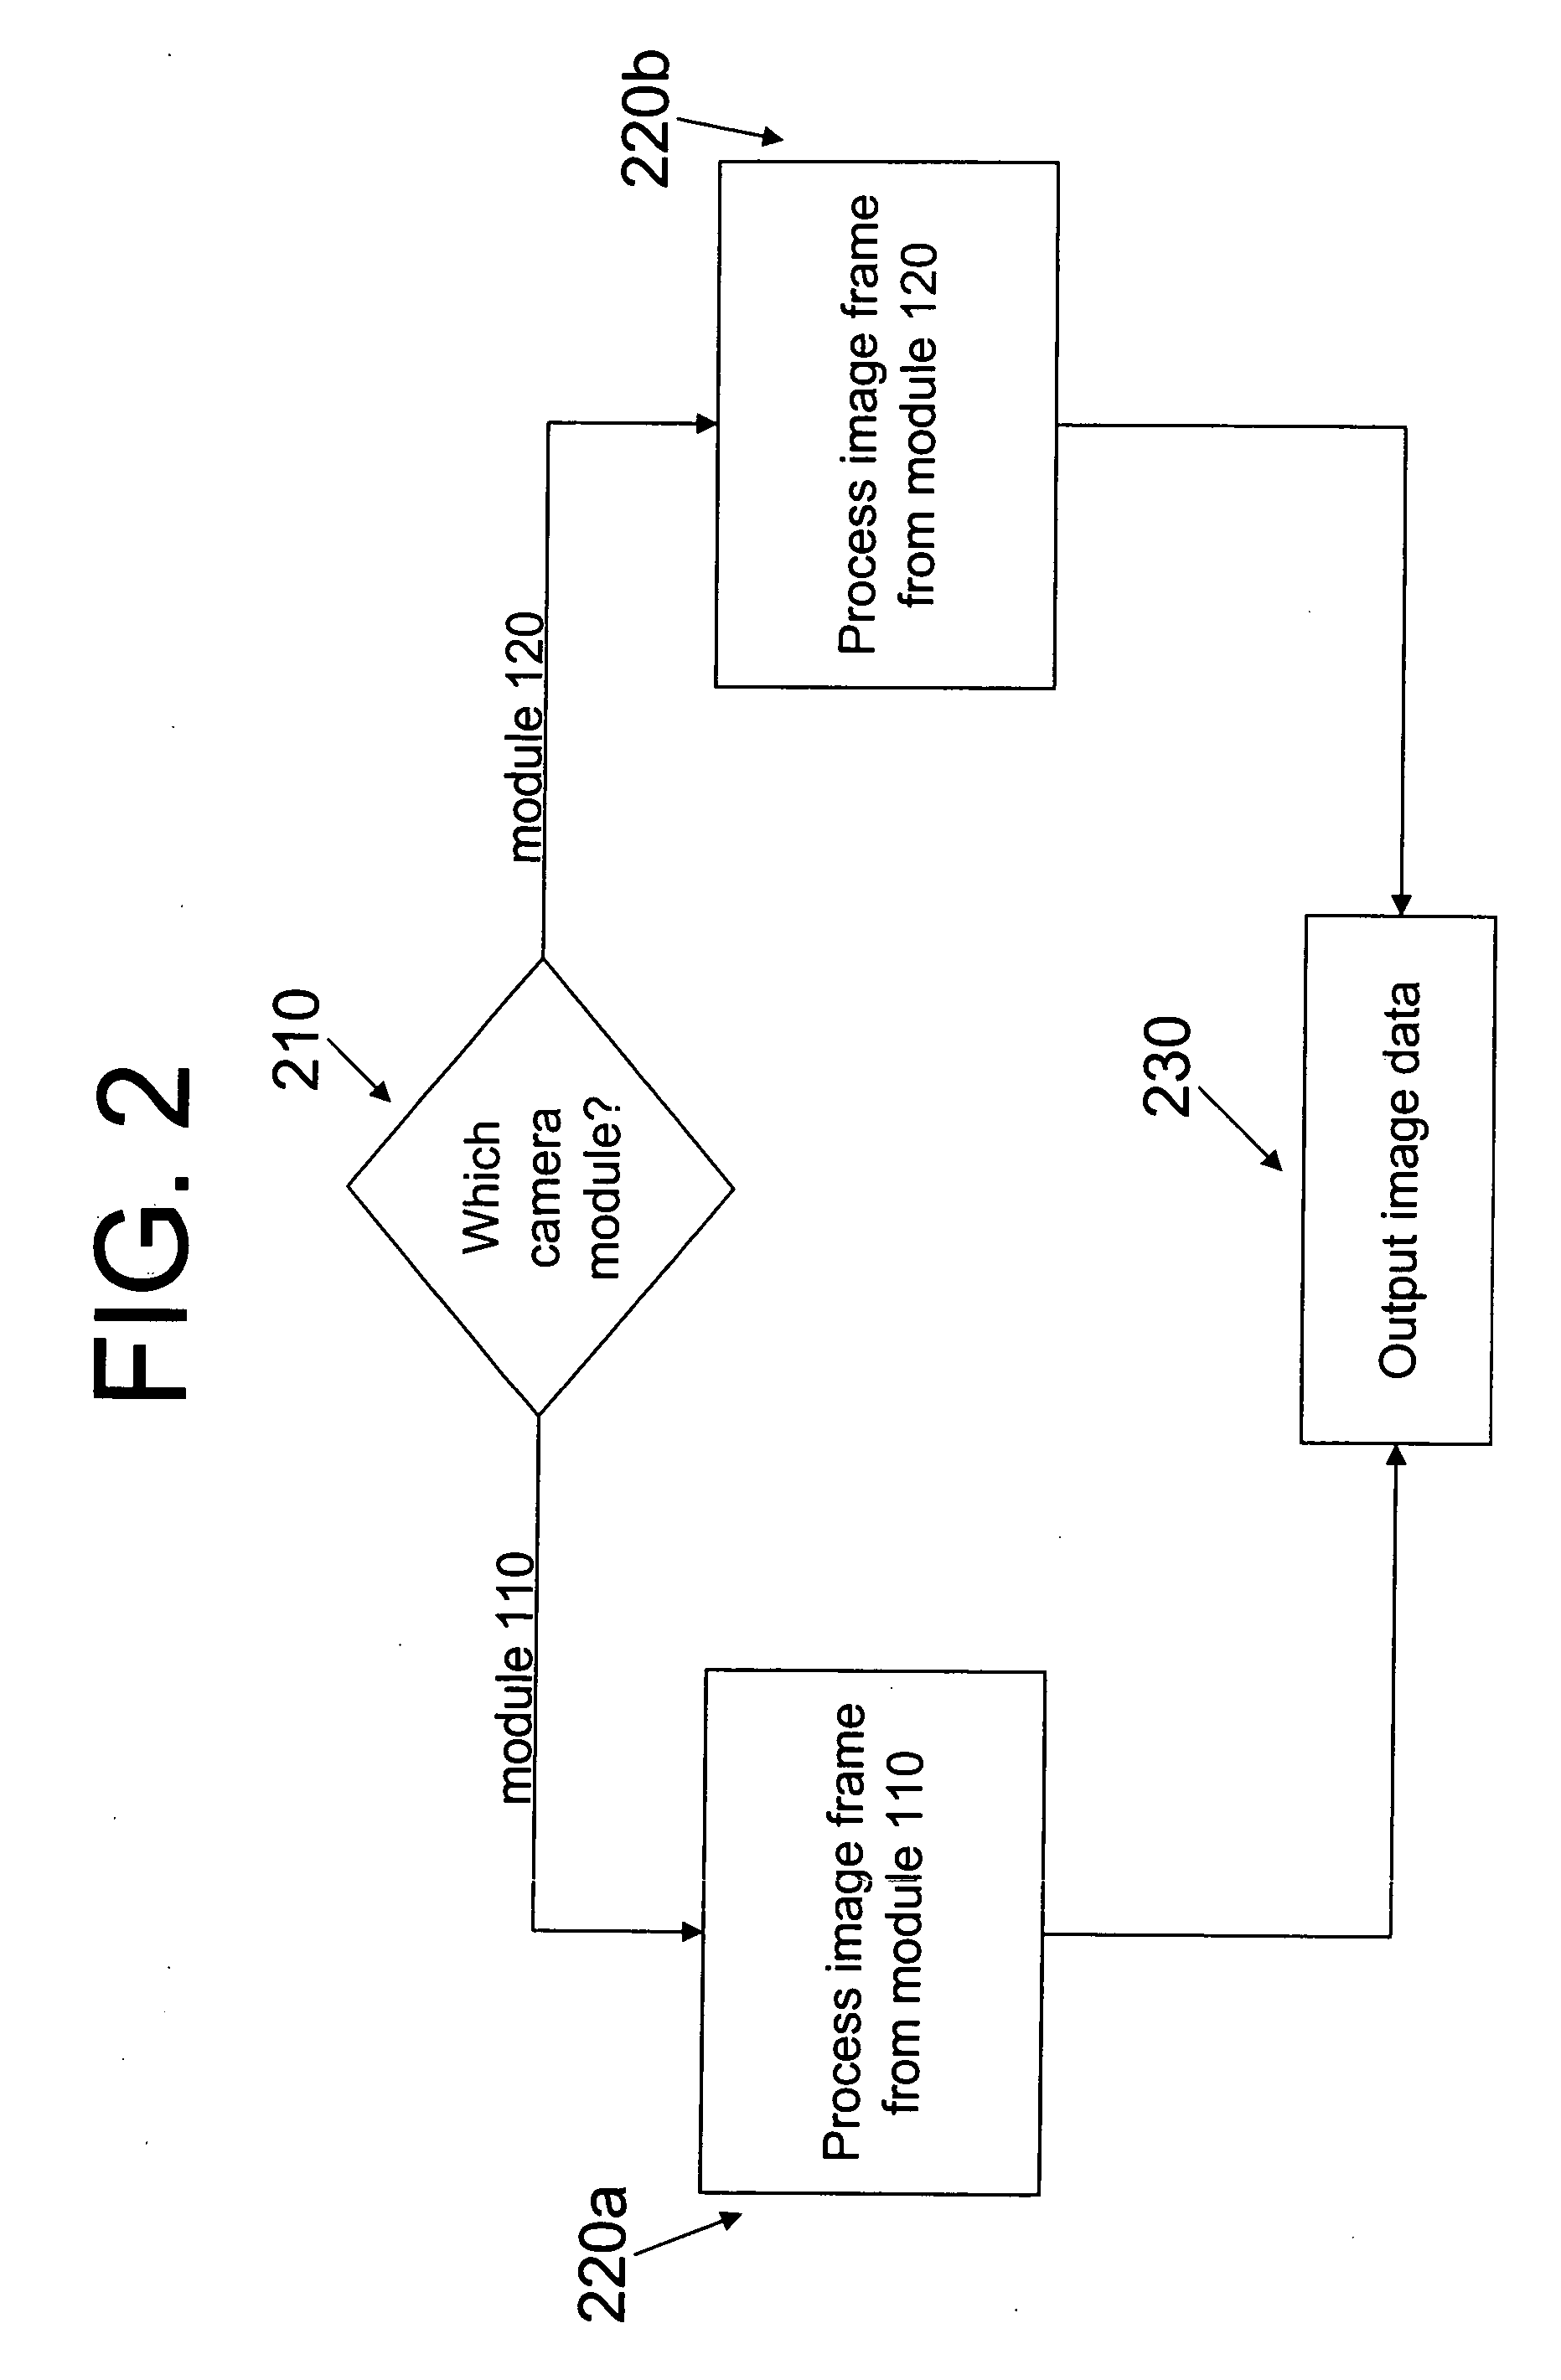 Method and apparatus minimizing die area and module size for a dual-camera mobile device